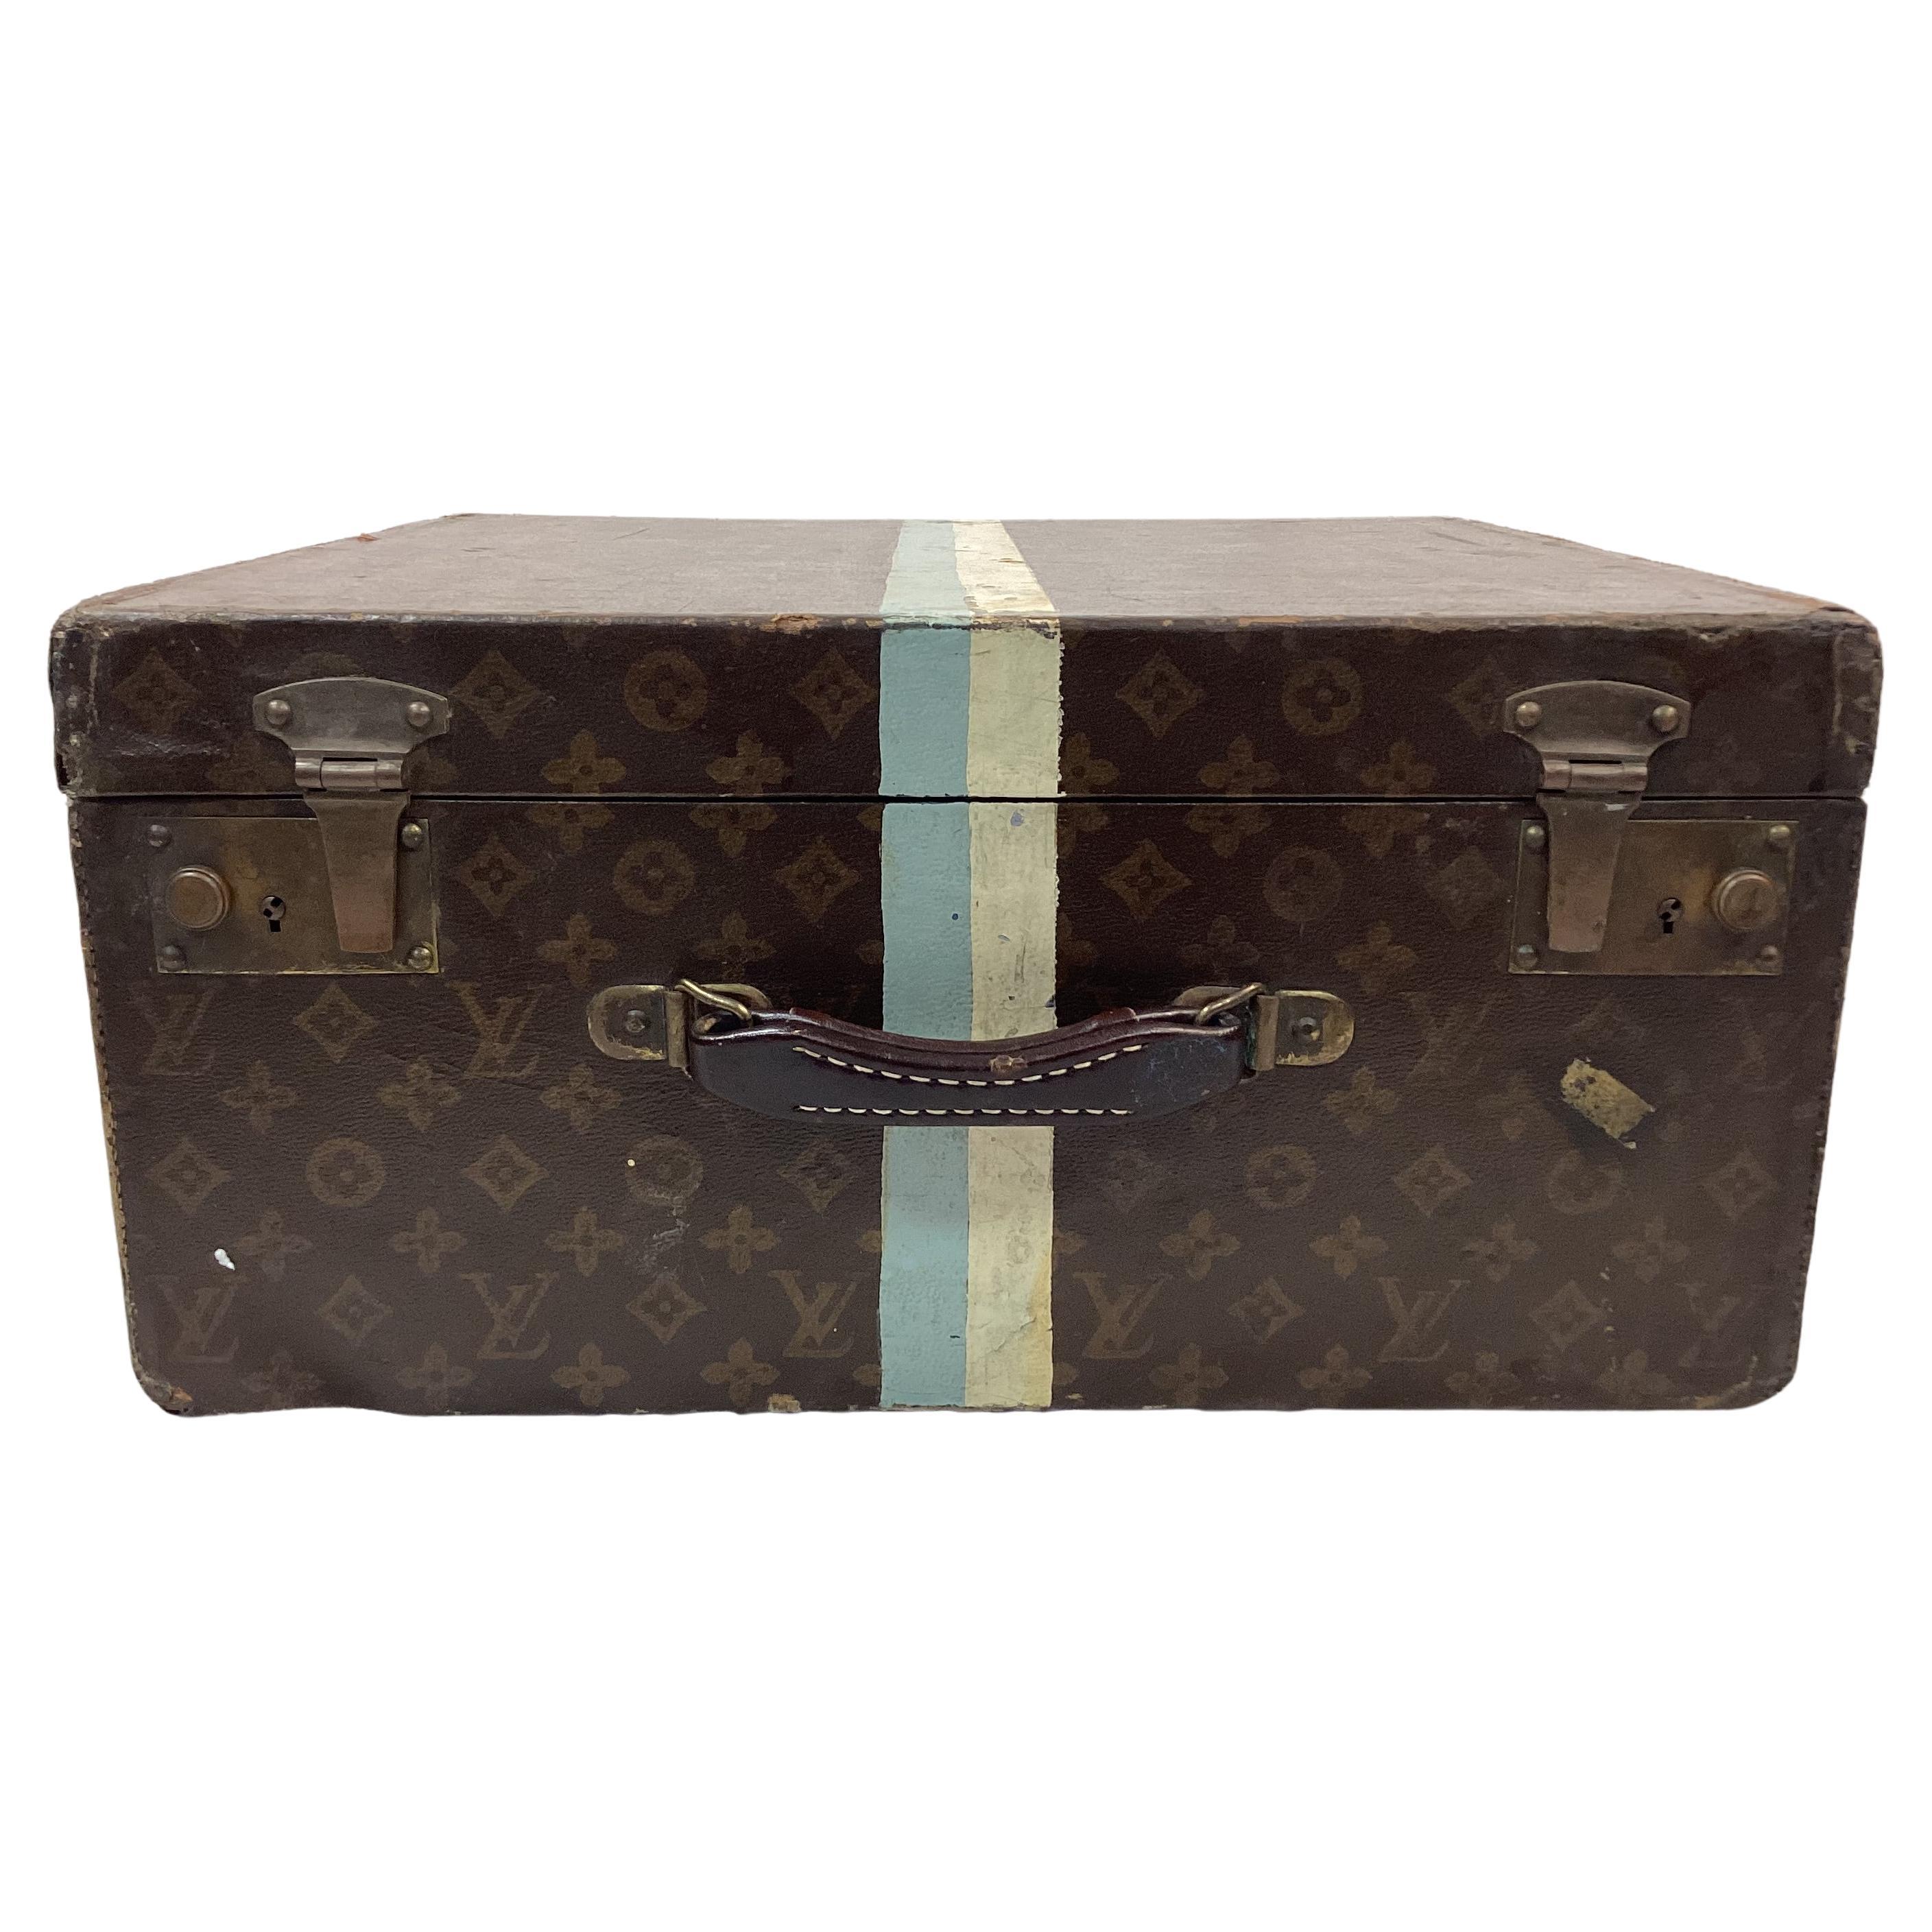 Rare antique French early 20th century Louis Vuitton monogrammed luggage cube trunk. Features previous owners initials along with blue and white stripes. Authentic Louis Vuitton label on inner top. 